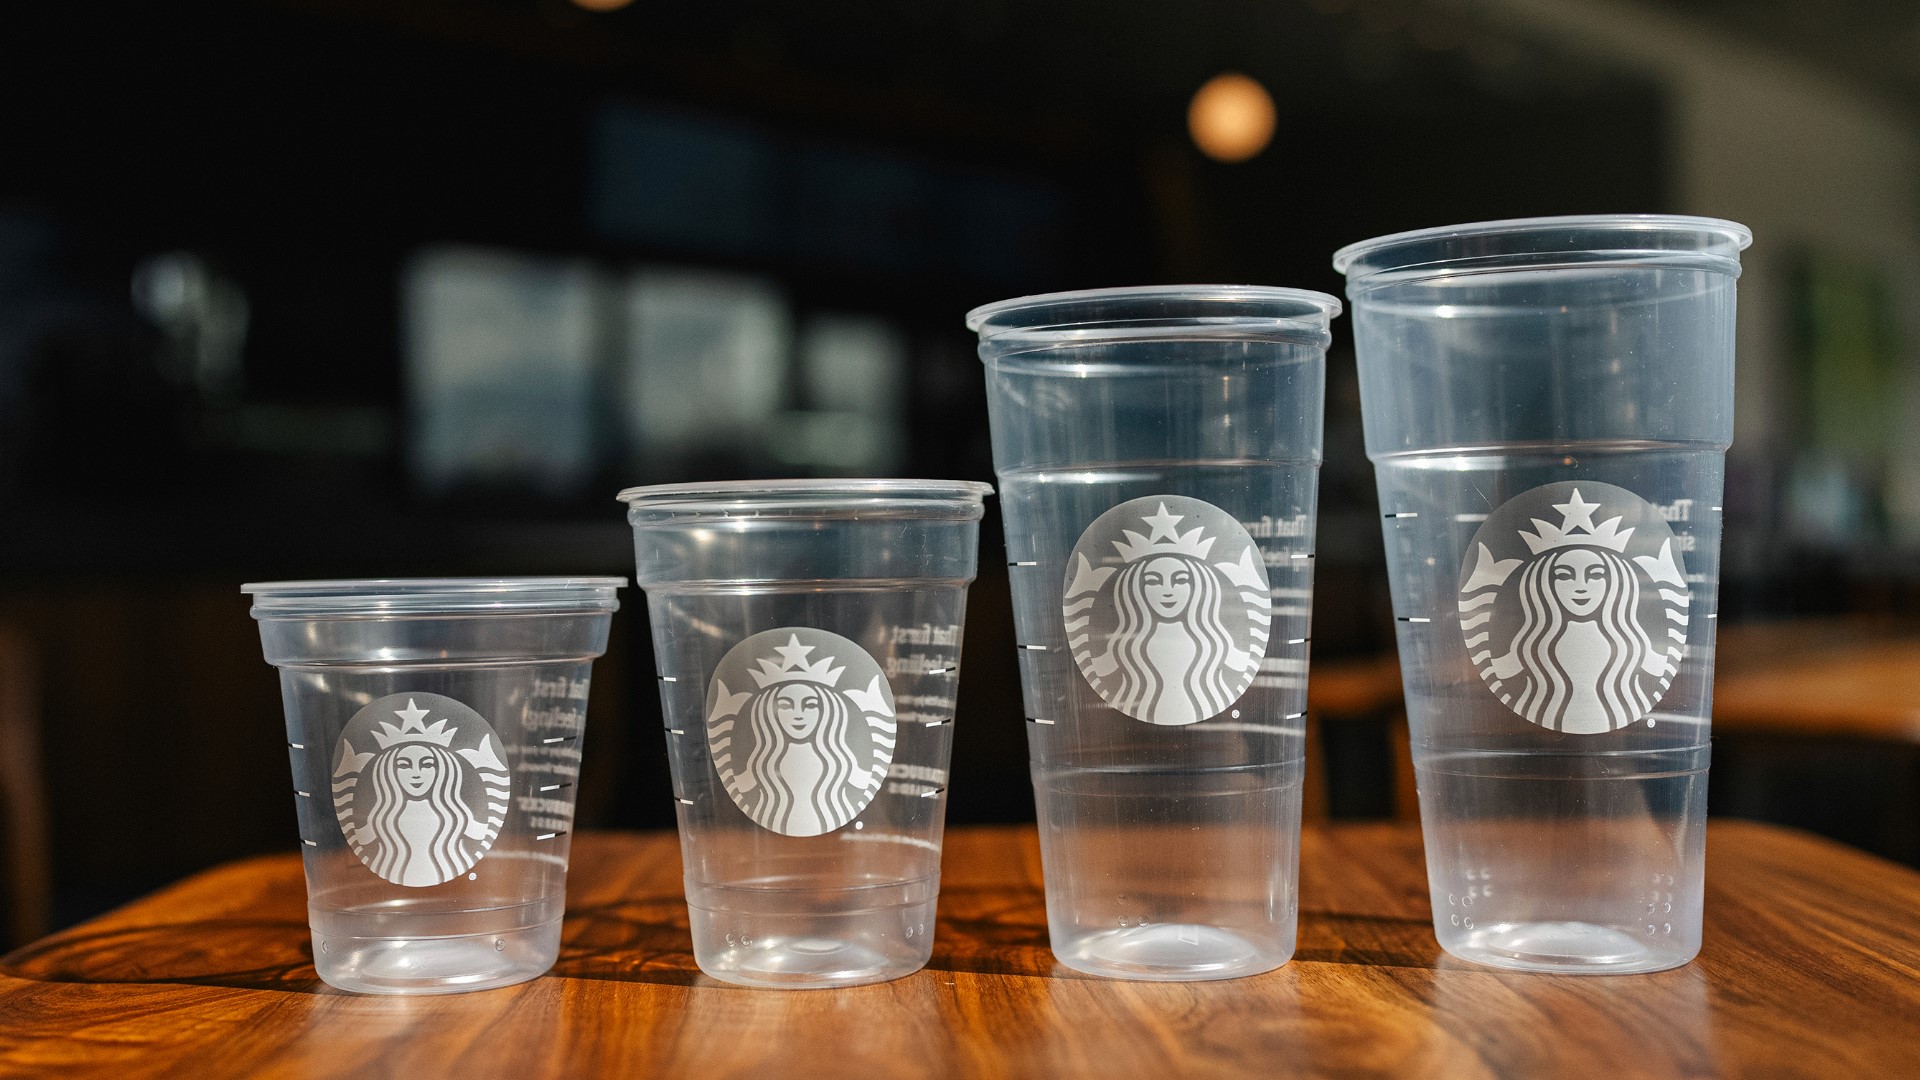 Starbucks is trying to cut down on plastic waste.